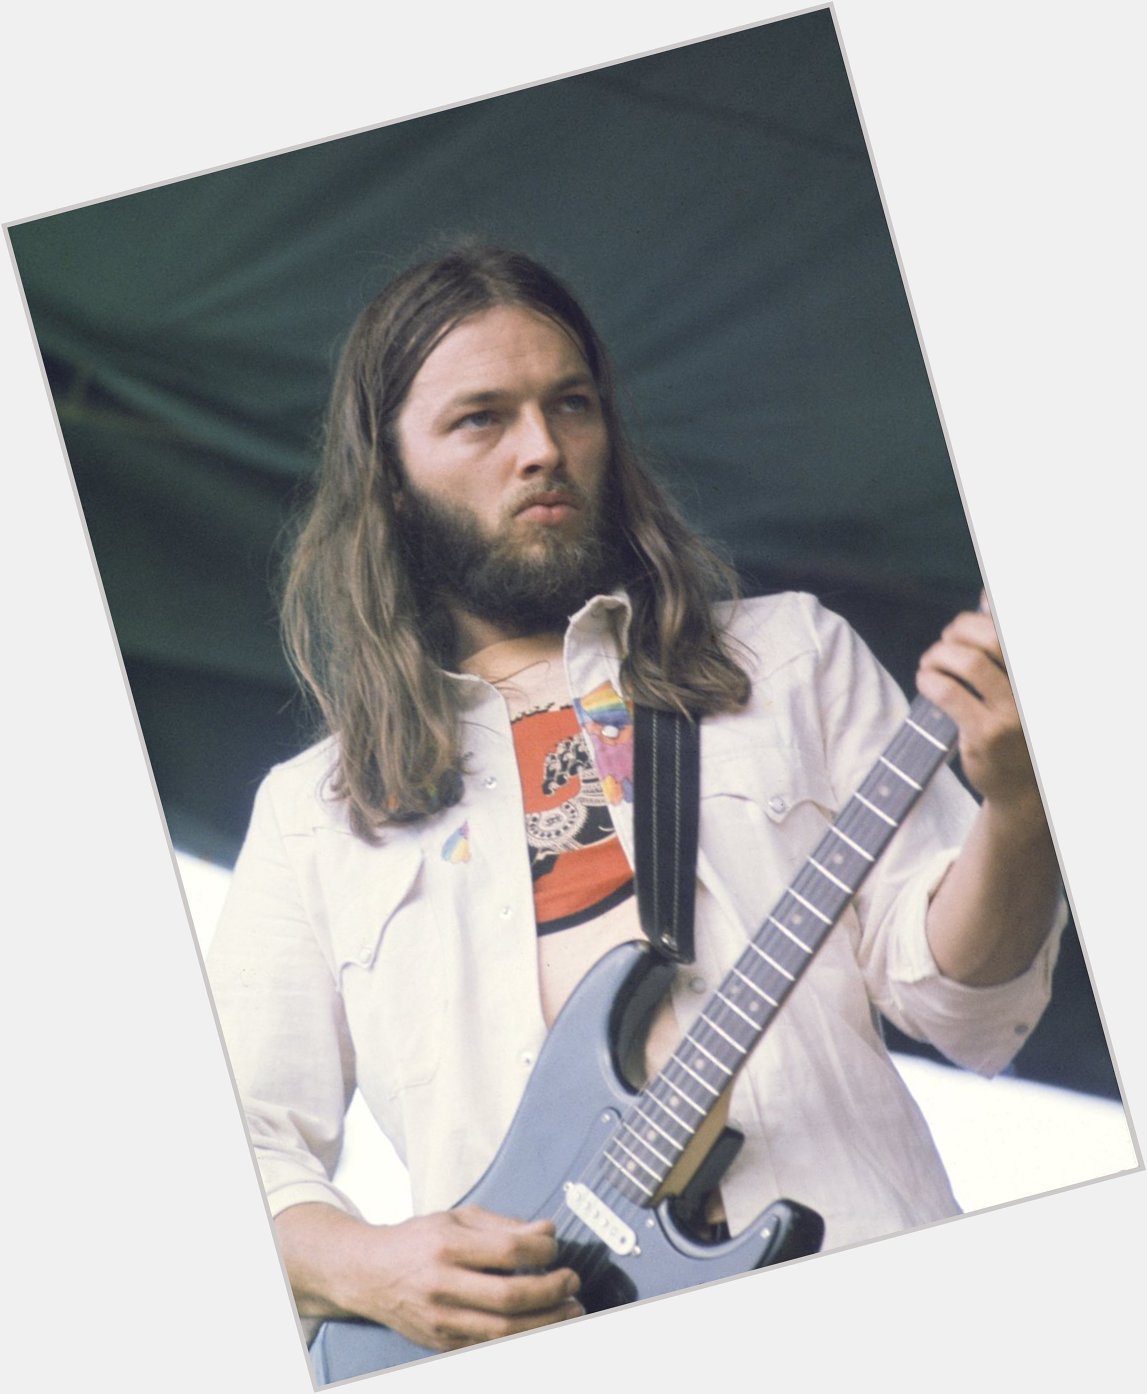 Happy 76th birthday to the great David Gilmour who was born on this day in 1946. 